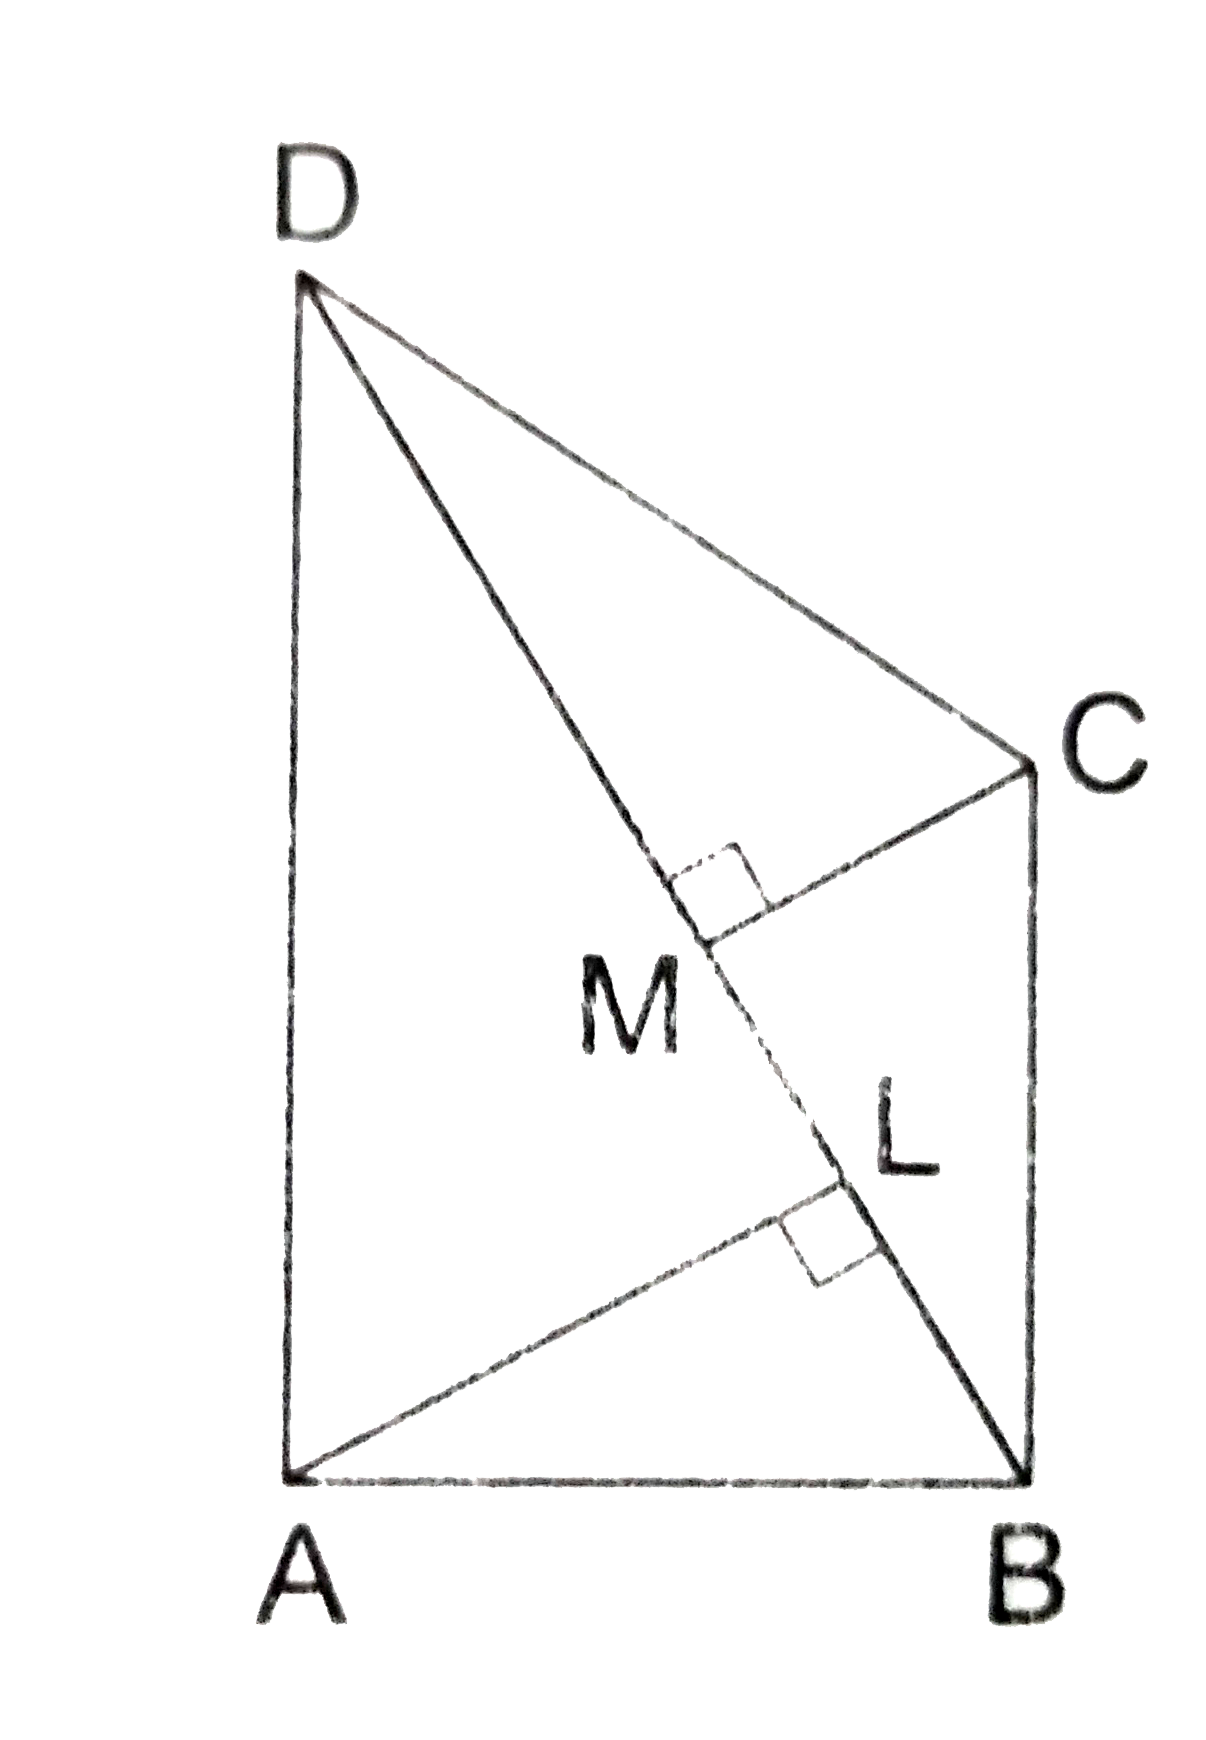 In the adjoining figure, ABCD is a quadrilateral in which diag. BD = 14 cm. If ALbotBD and CMbotBD such that AL = 8 cm and CM = 6 cm, find the area of quad. ABCD.